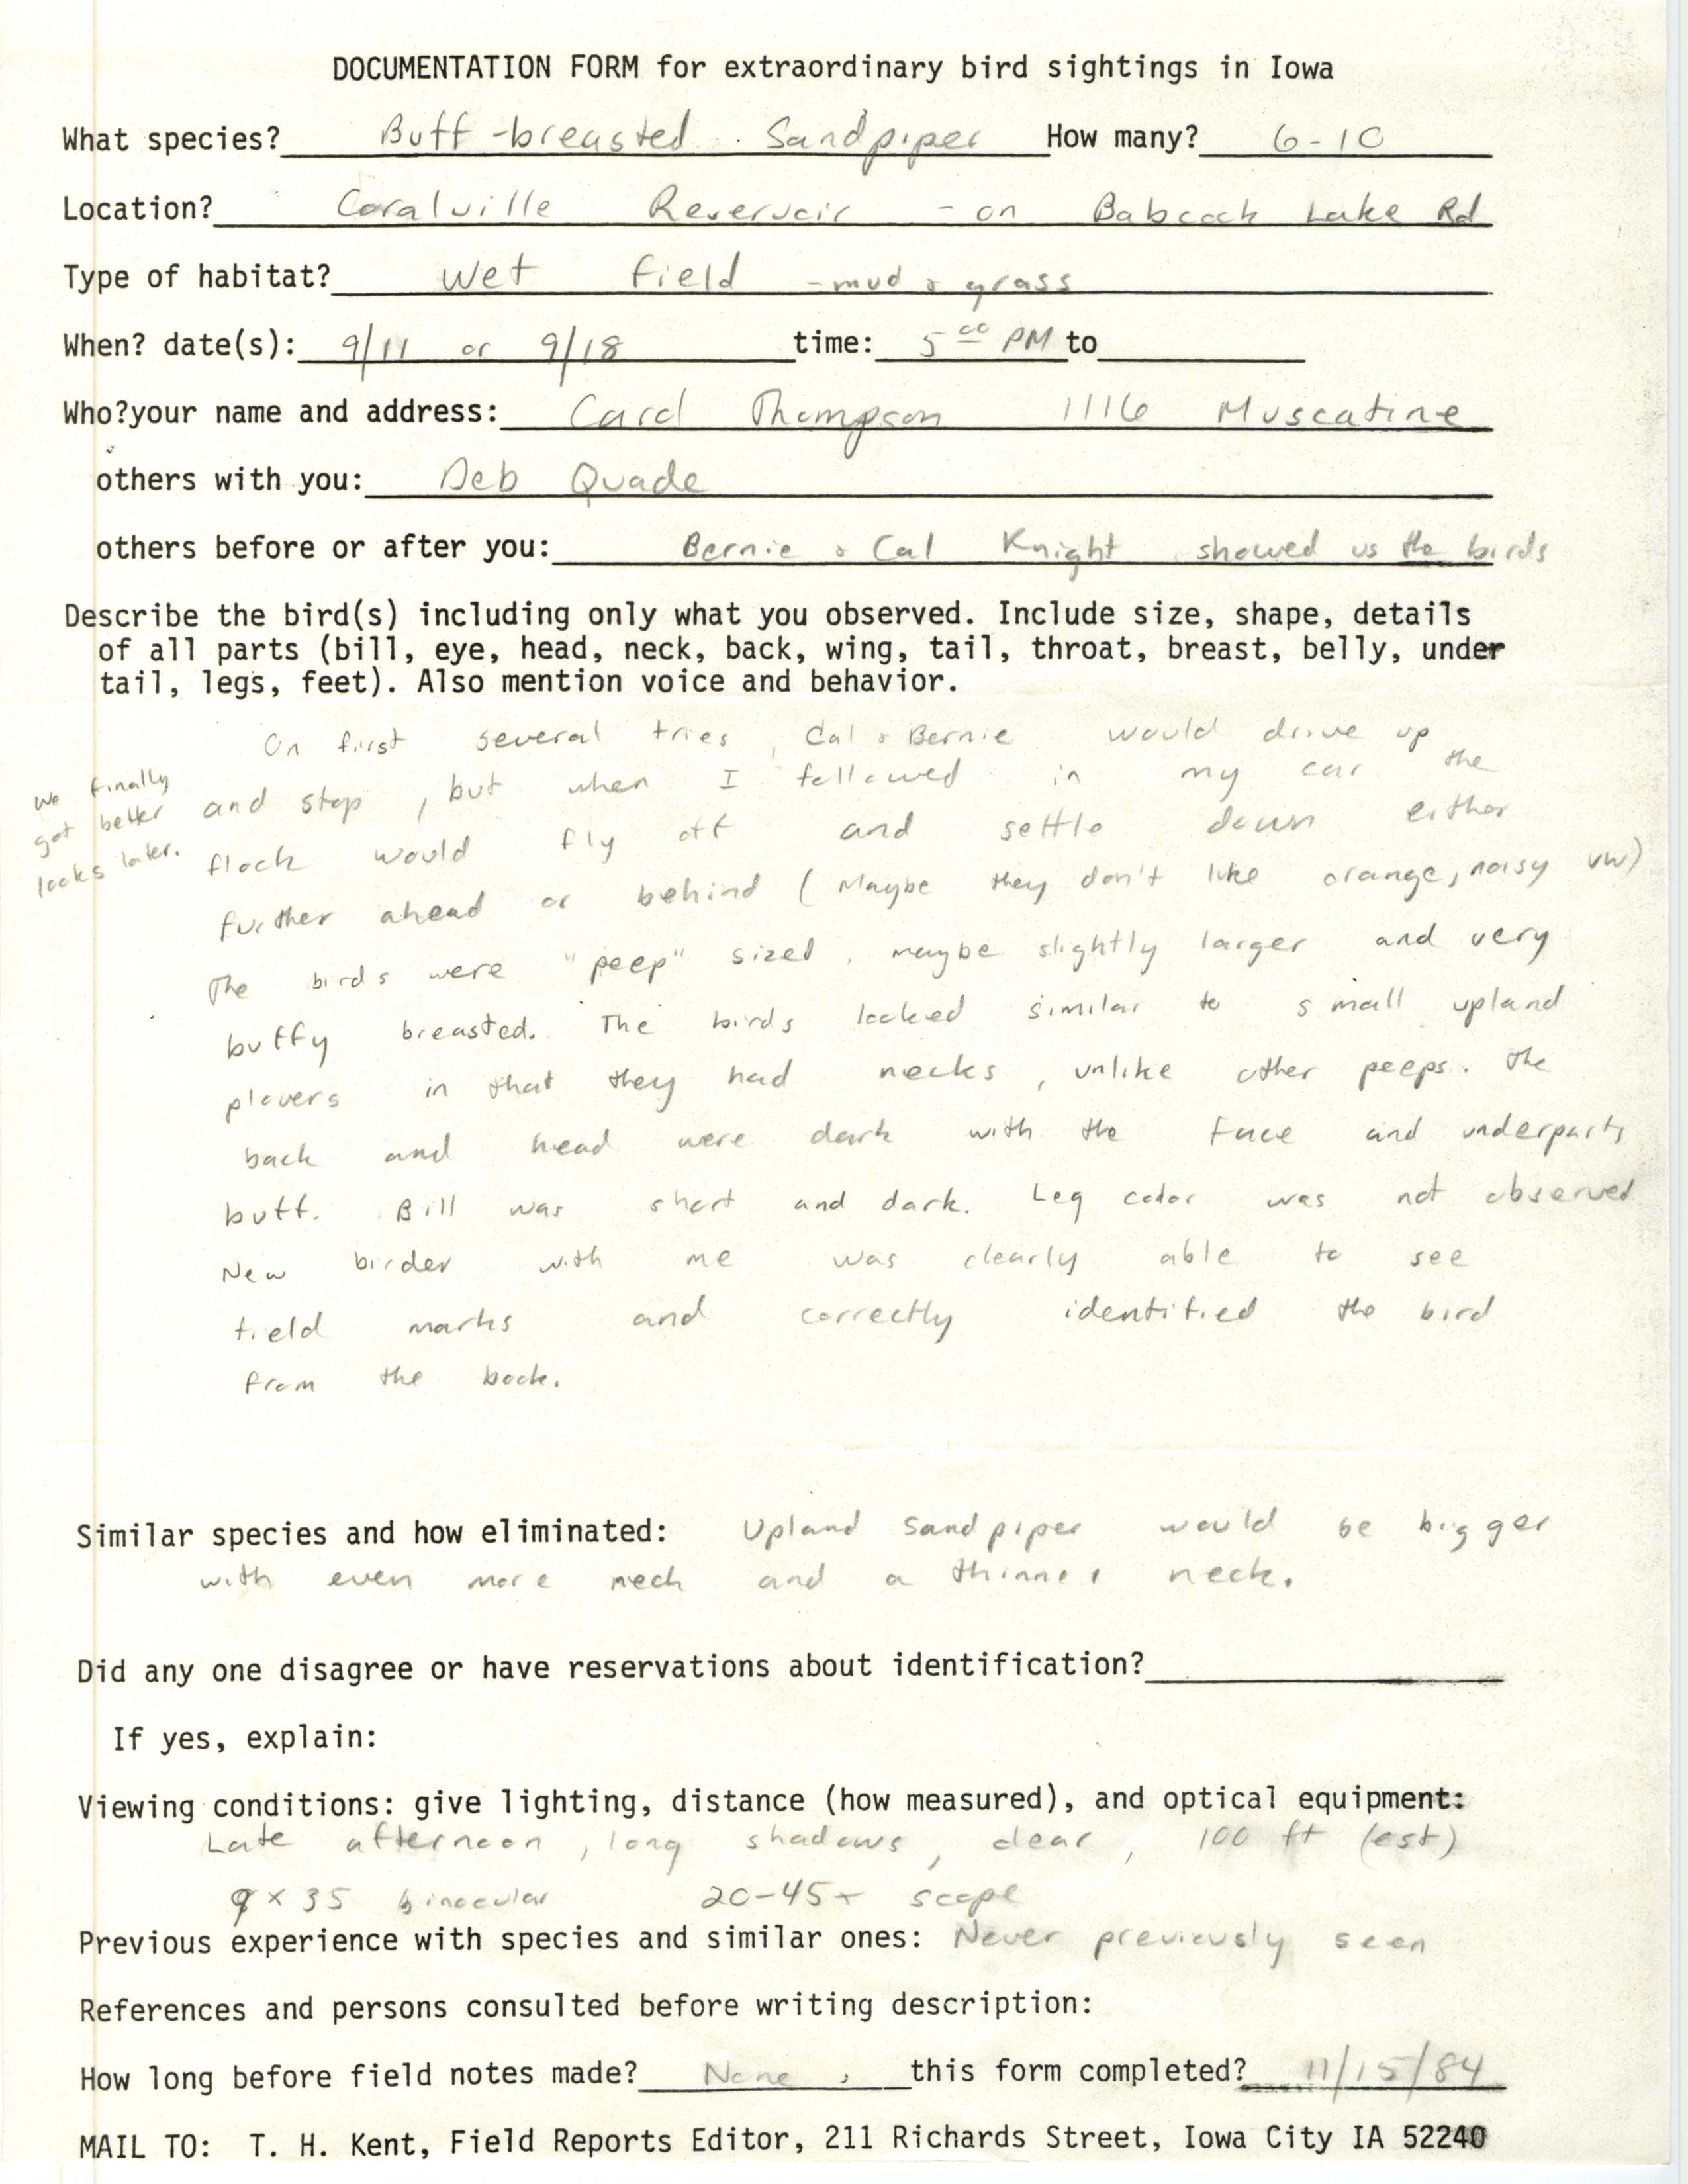 Rare bird documentation form for Buff-breasted Sandpiper at Babcock Access in Coralville Reservoir in 1984